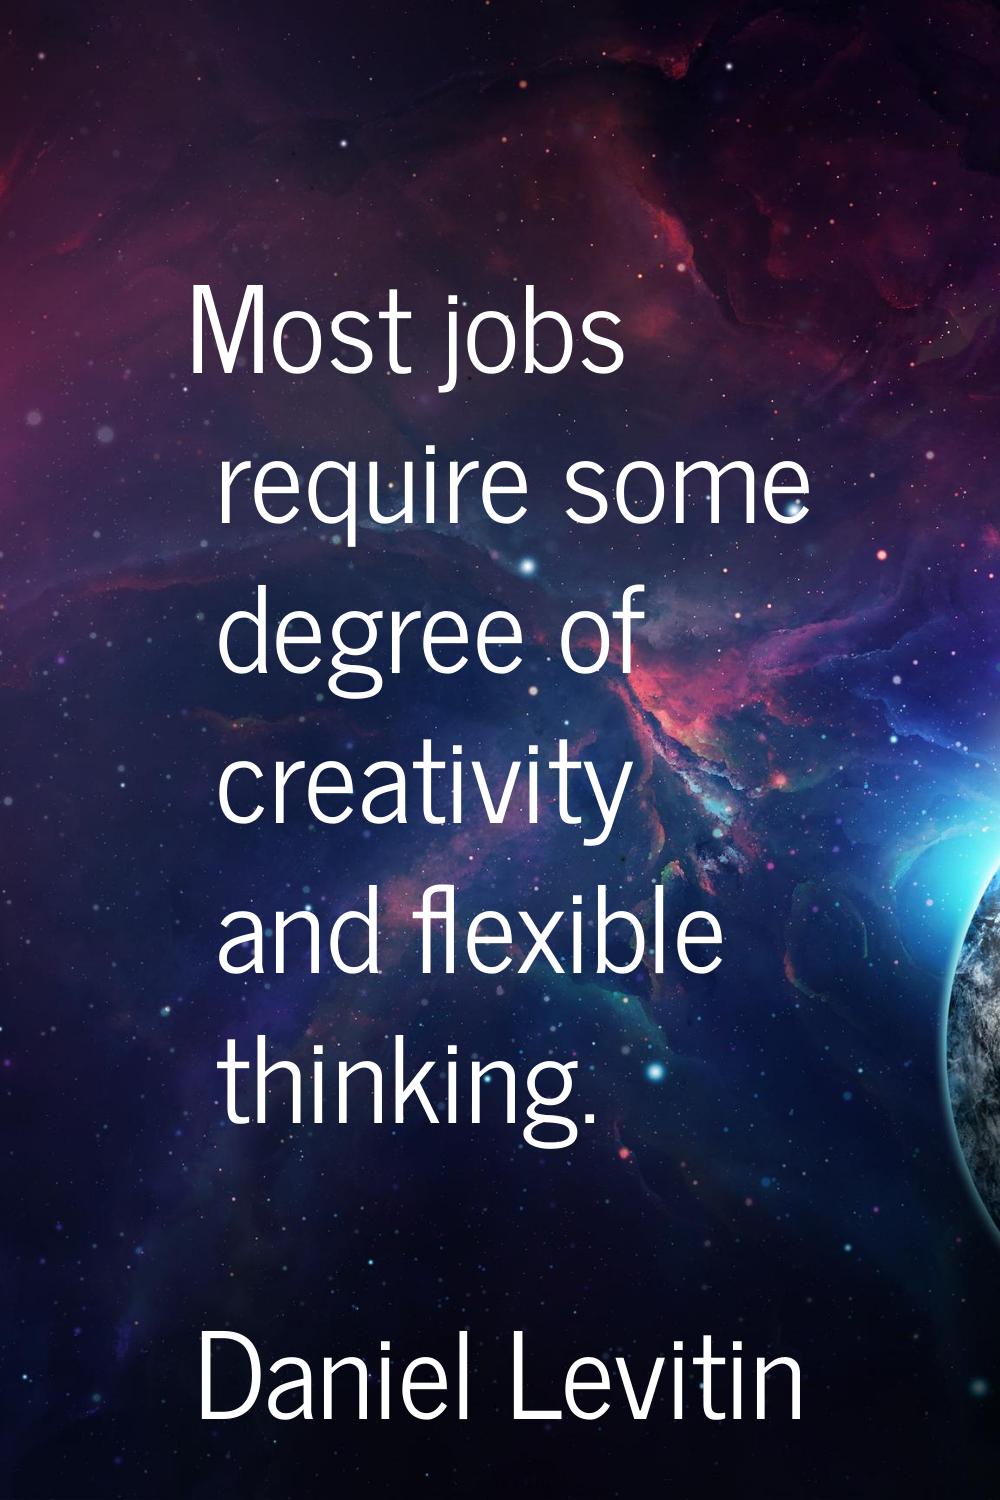 Most jobs require some degree of creativity and flexible thinking.